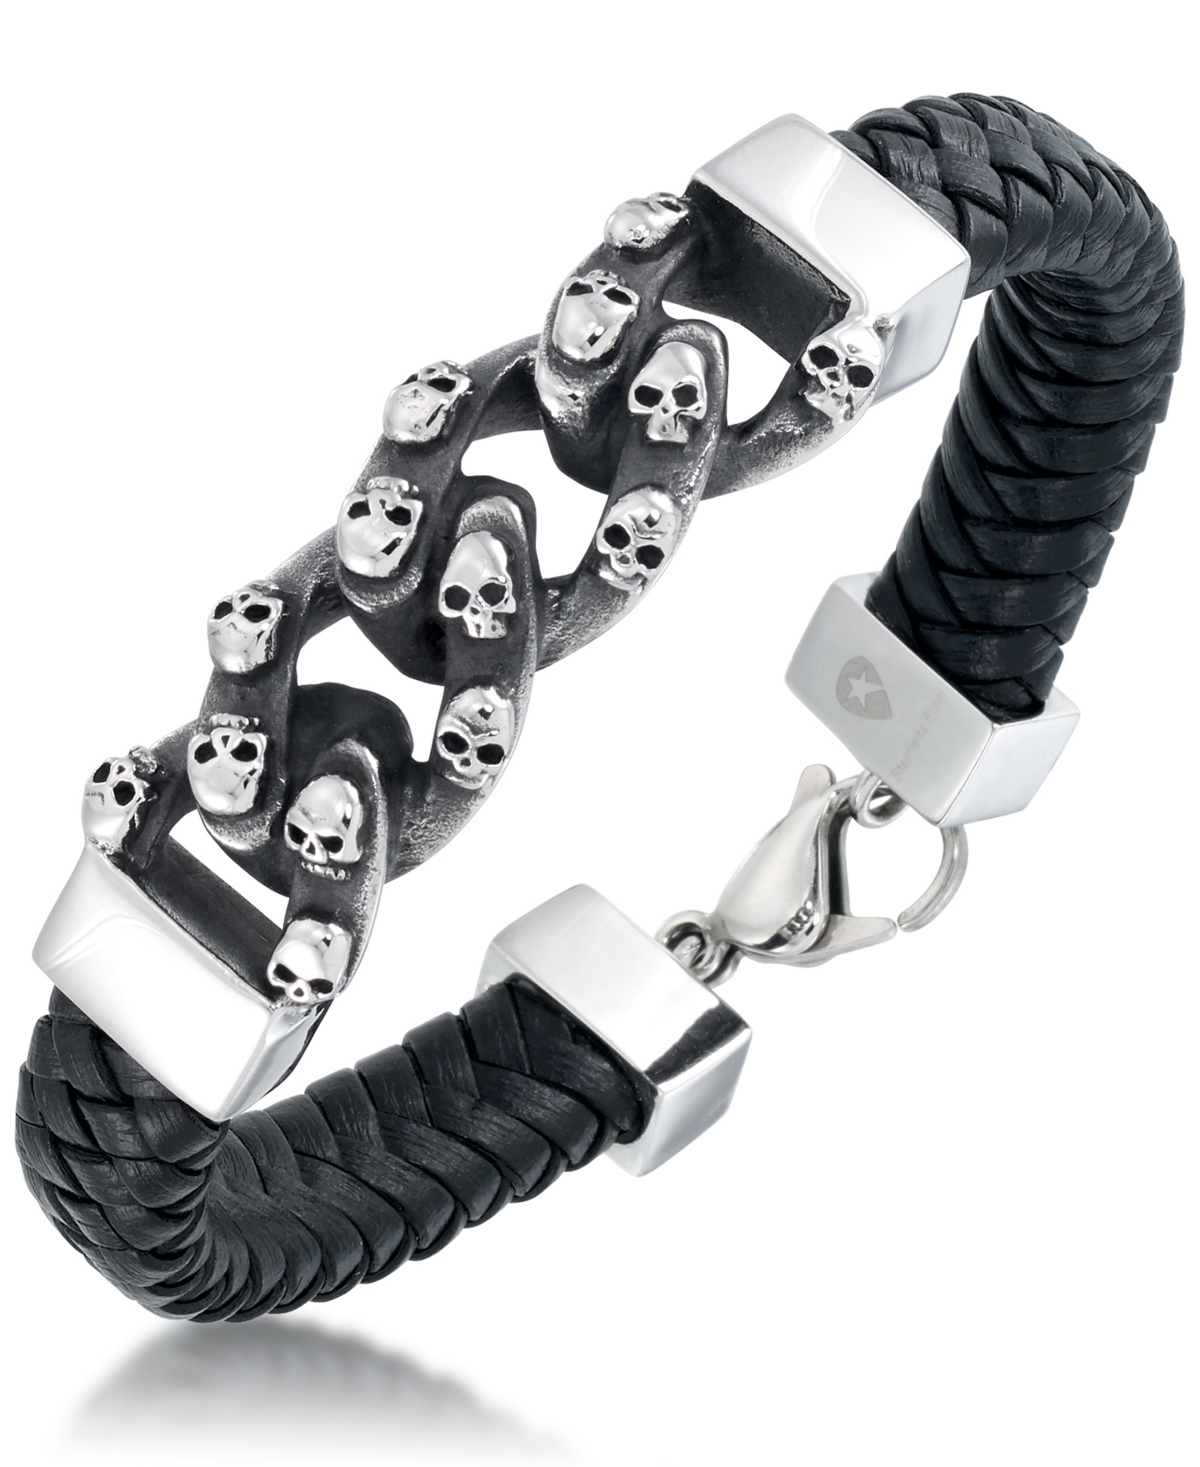 Andrew Charles by Andy Hilfiger Men's Skull Link Leather Bracelet in Stainless Steel